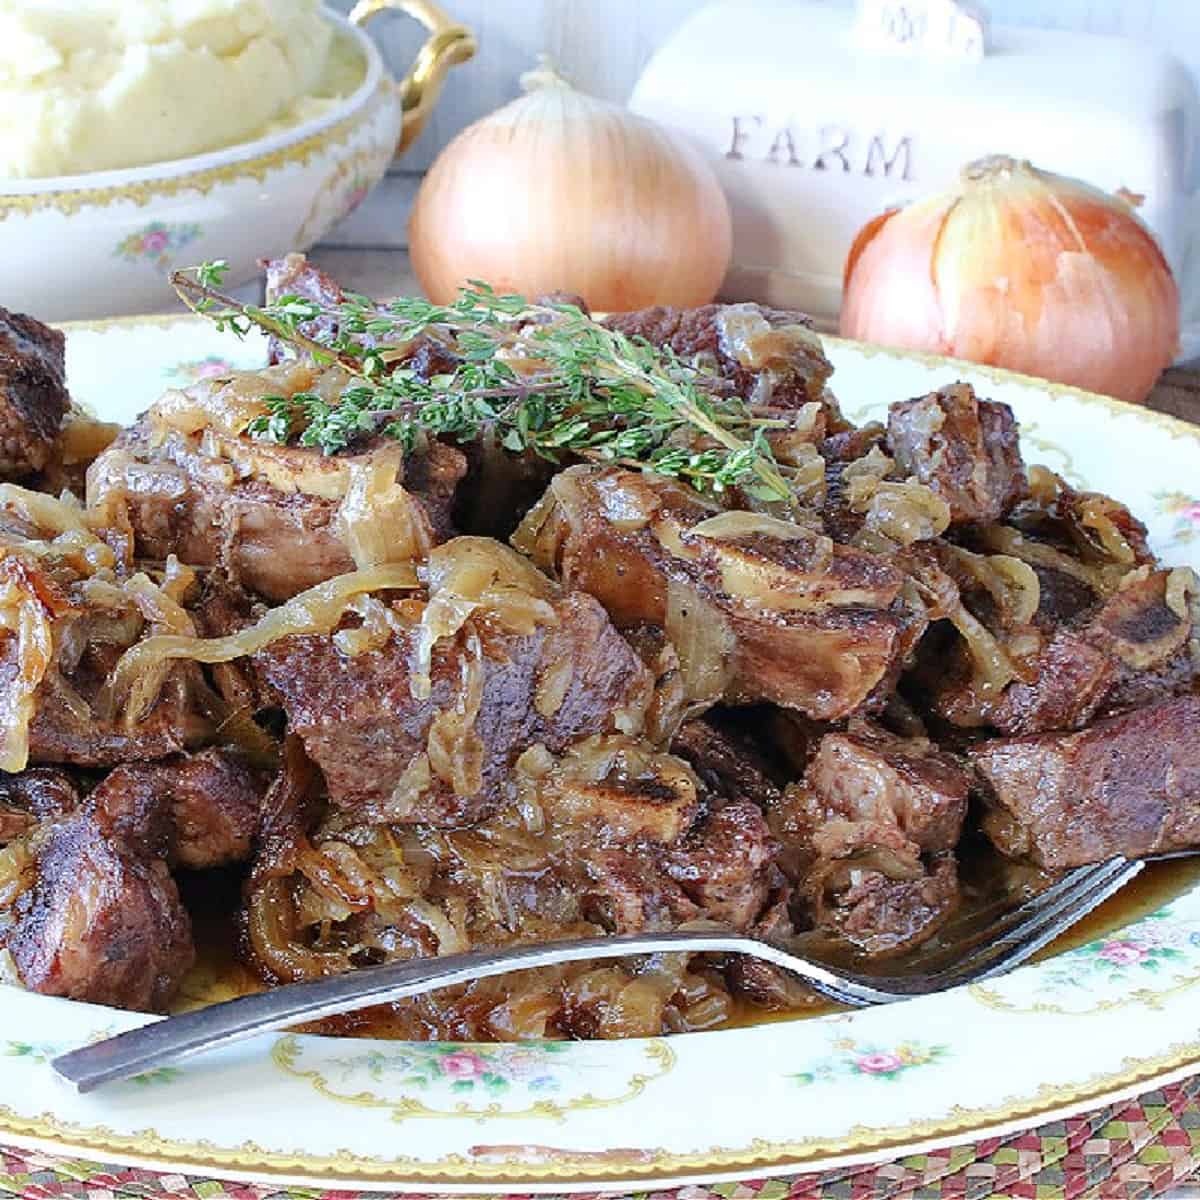 A platter filled with French Onion Short Ribs with fresh thyme sprigs on top and a bowl of mashed potatoes in the background.